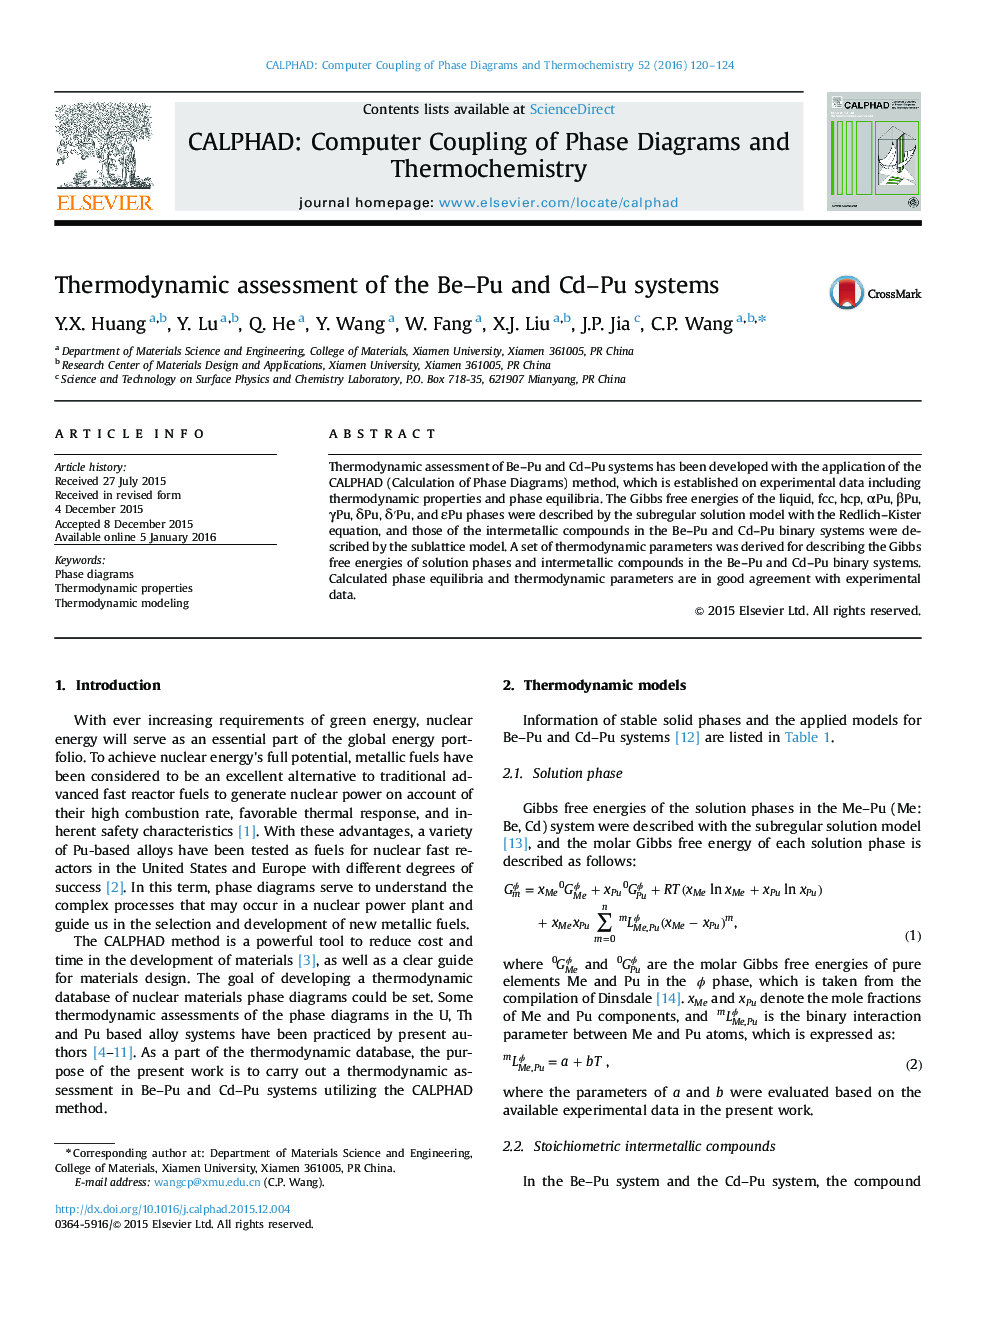 Thermodynamic assessment of the Be-Pu and Cd-Pu systems